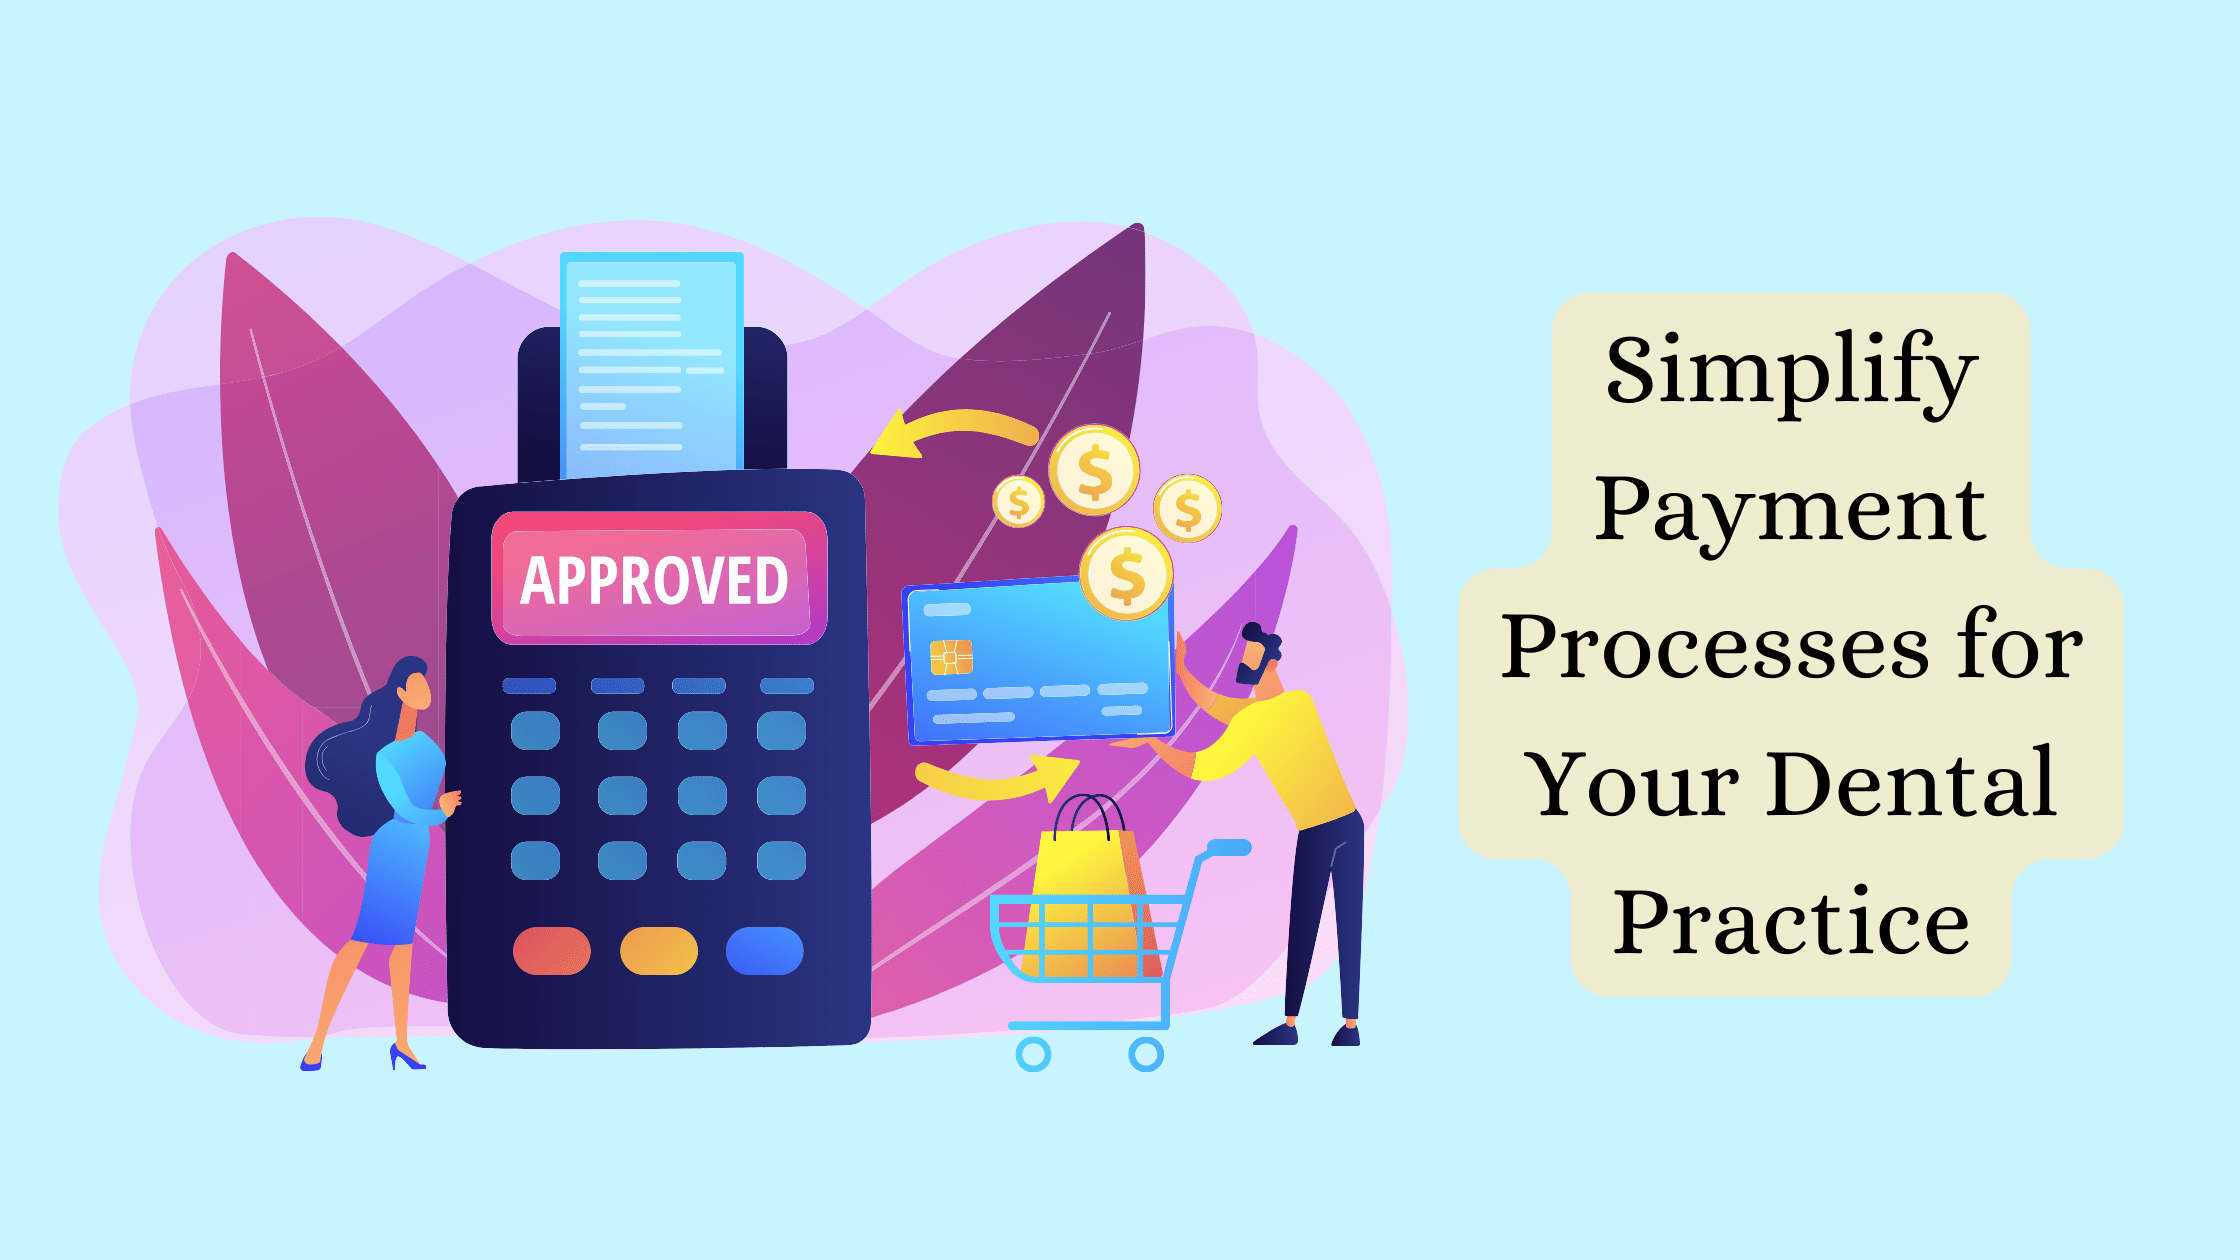 Payment Processes for Your Dental Practice